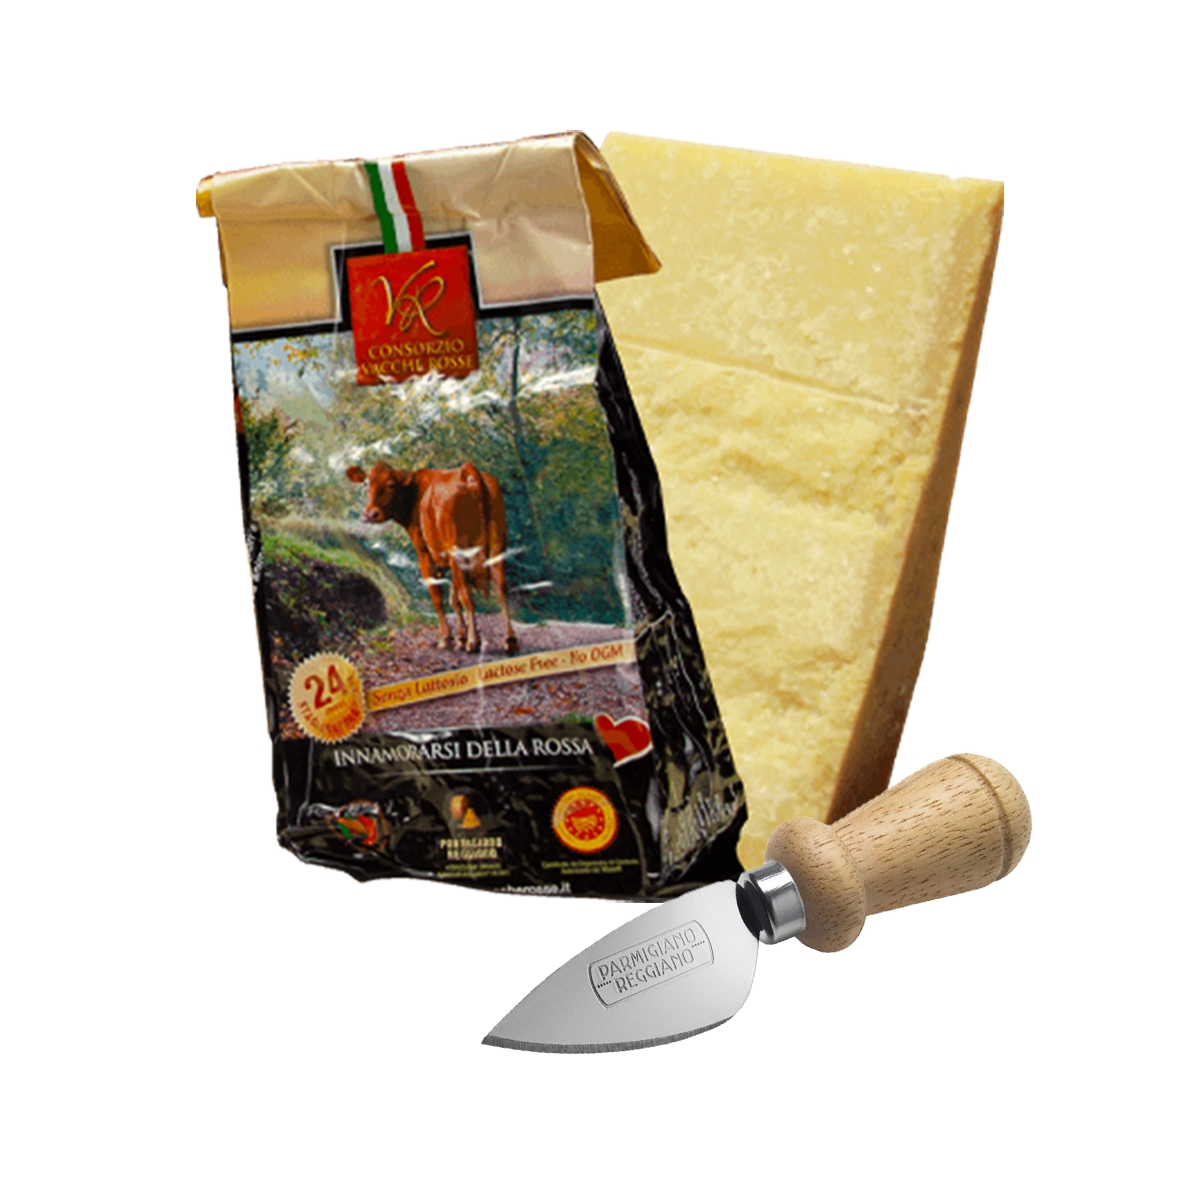 Parmigiano Reggiano Vacche Rosse 24 Months - 1 Kg - Stainless Steel Knife Gift Consorz